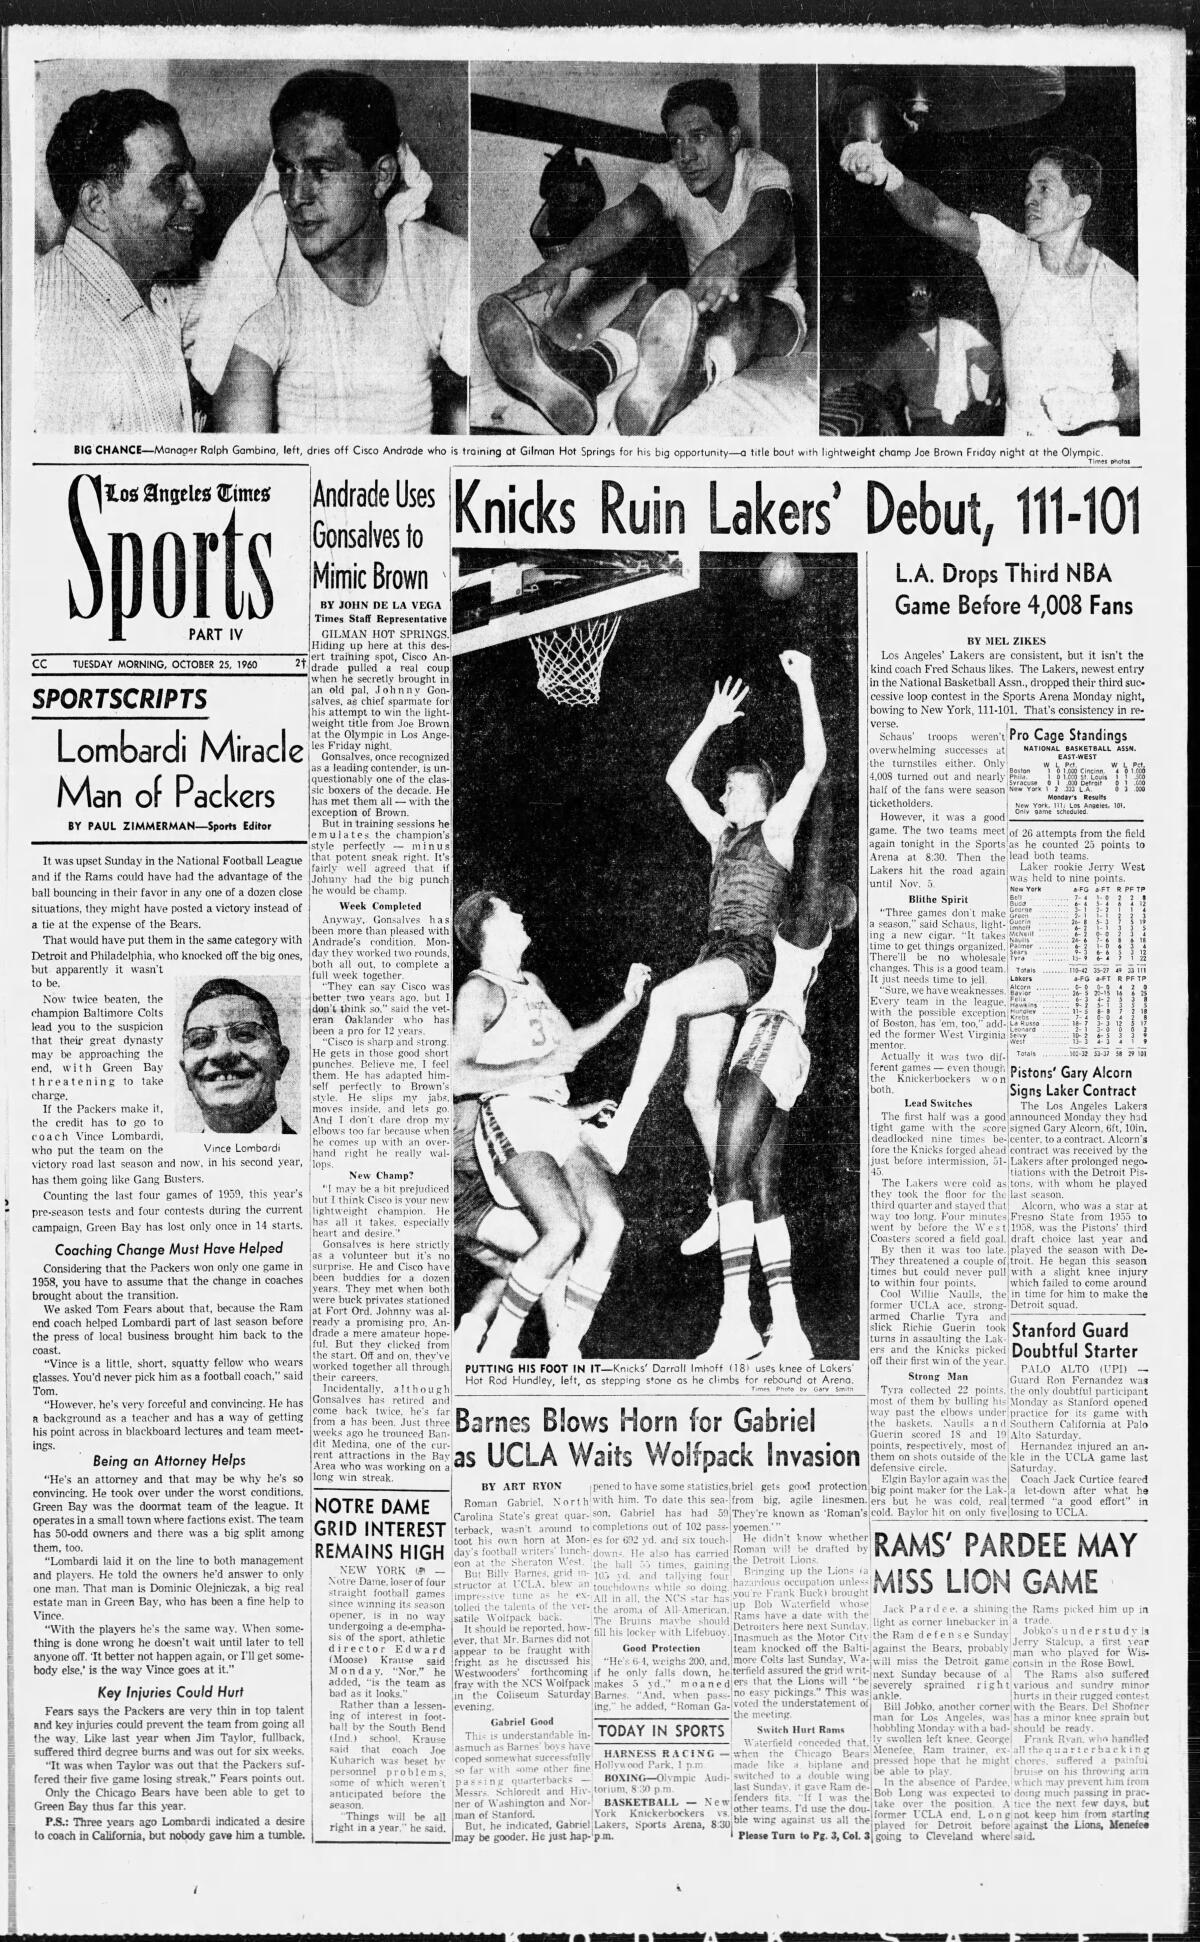 Game story on the Lakers' first game in L.A. in 1960.